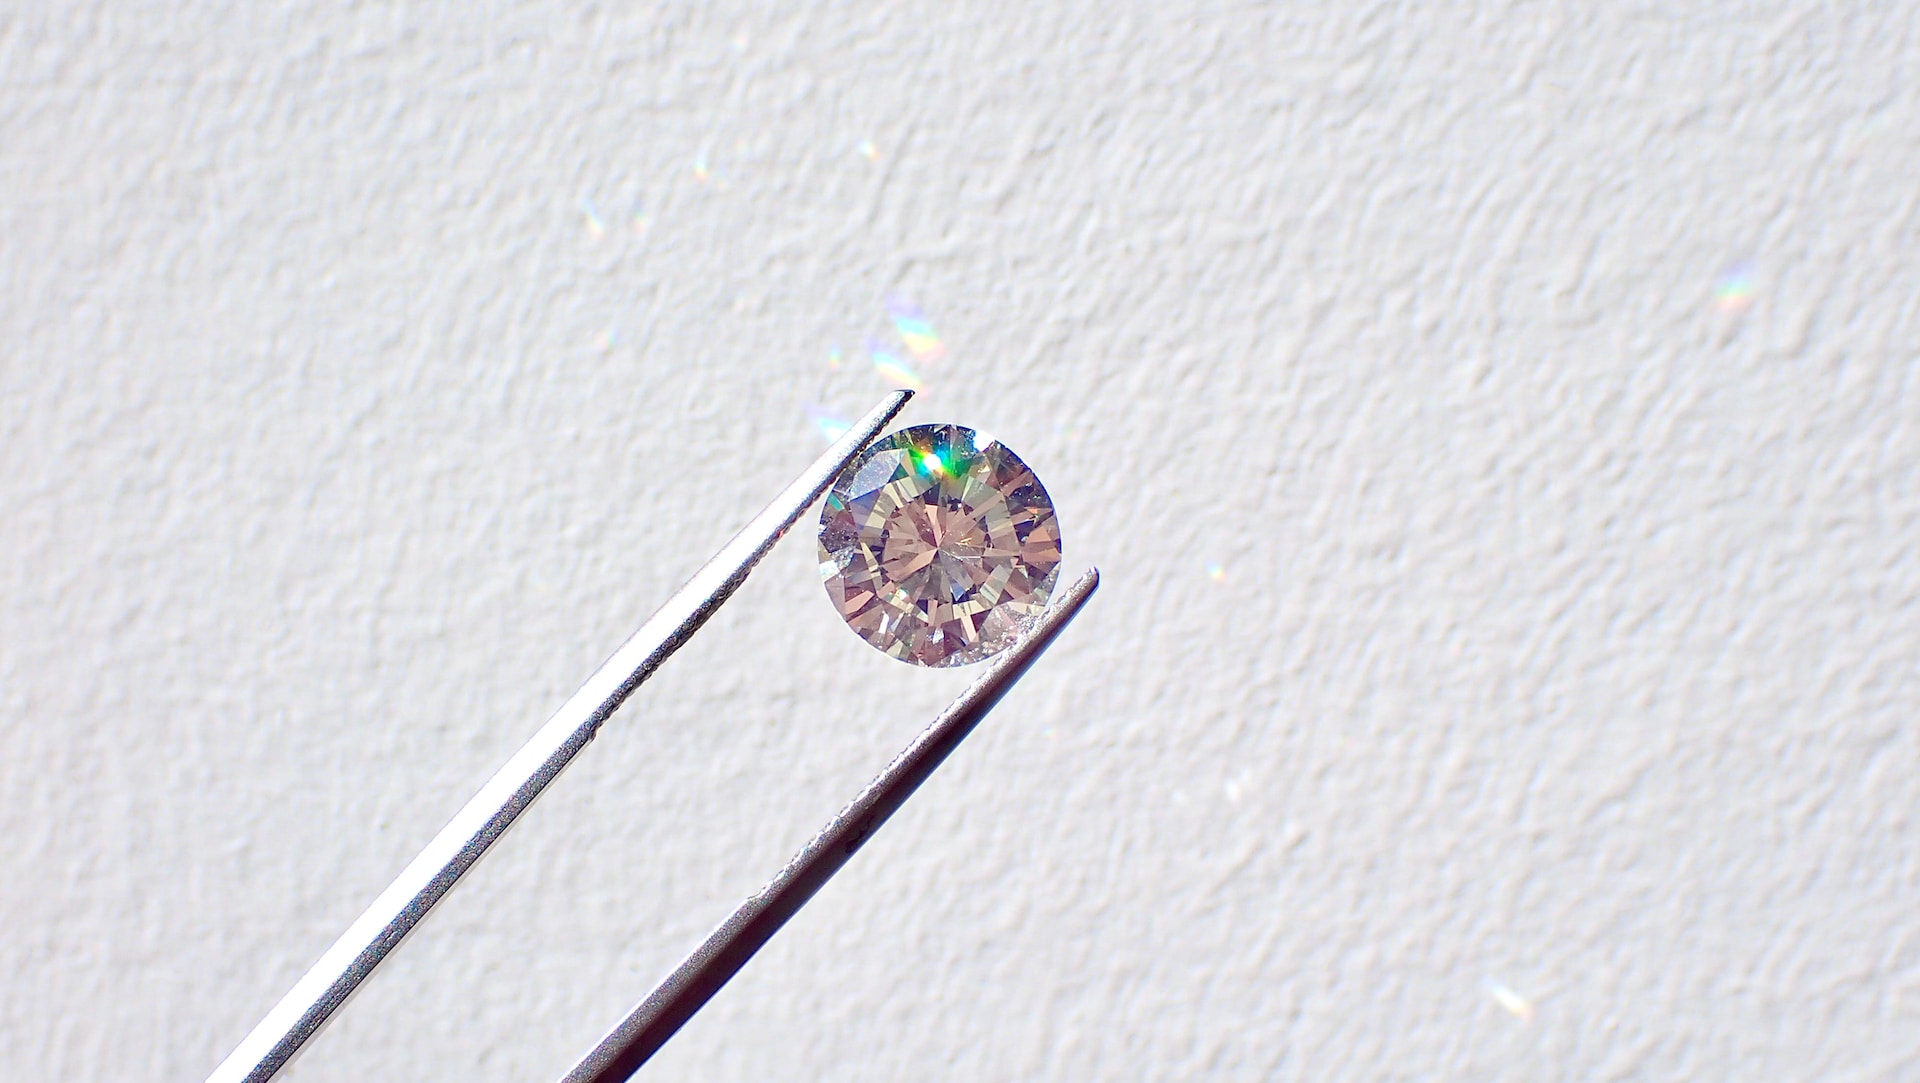 A pair of jewelry pliers holds up a round-cut diamond against a white wall.